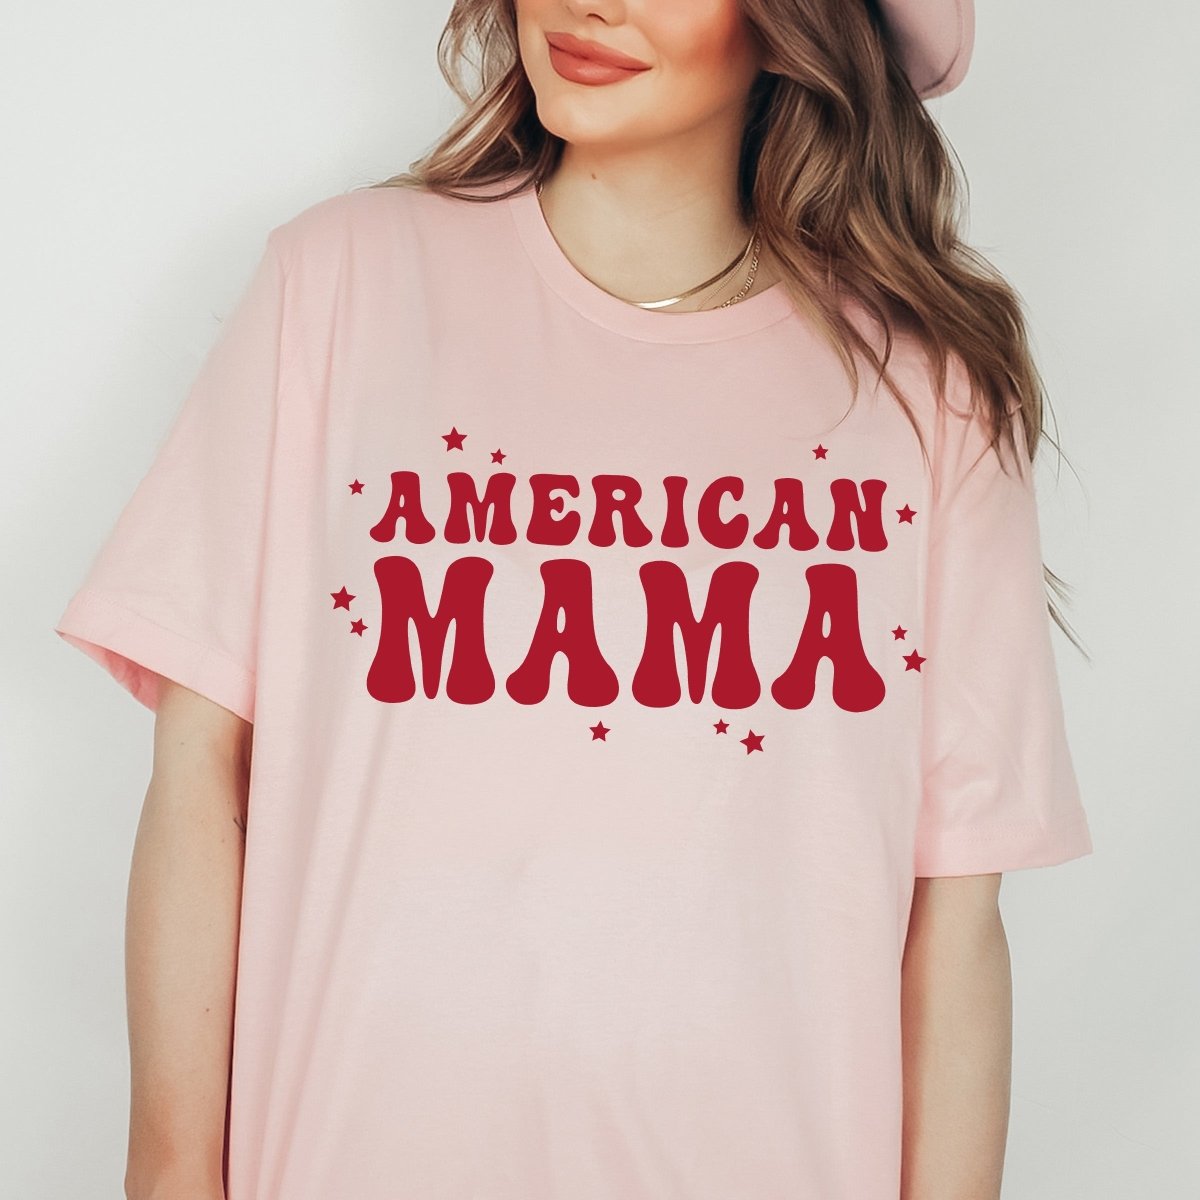 American Mama Wholesale Tee - Limeberry Designs